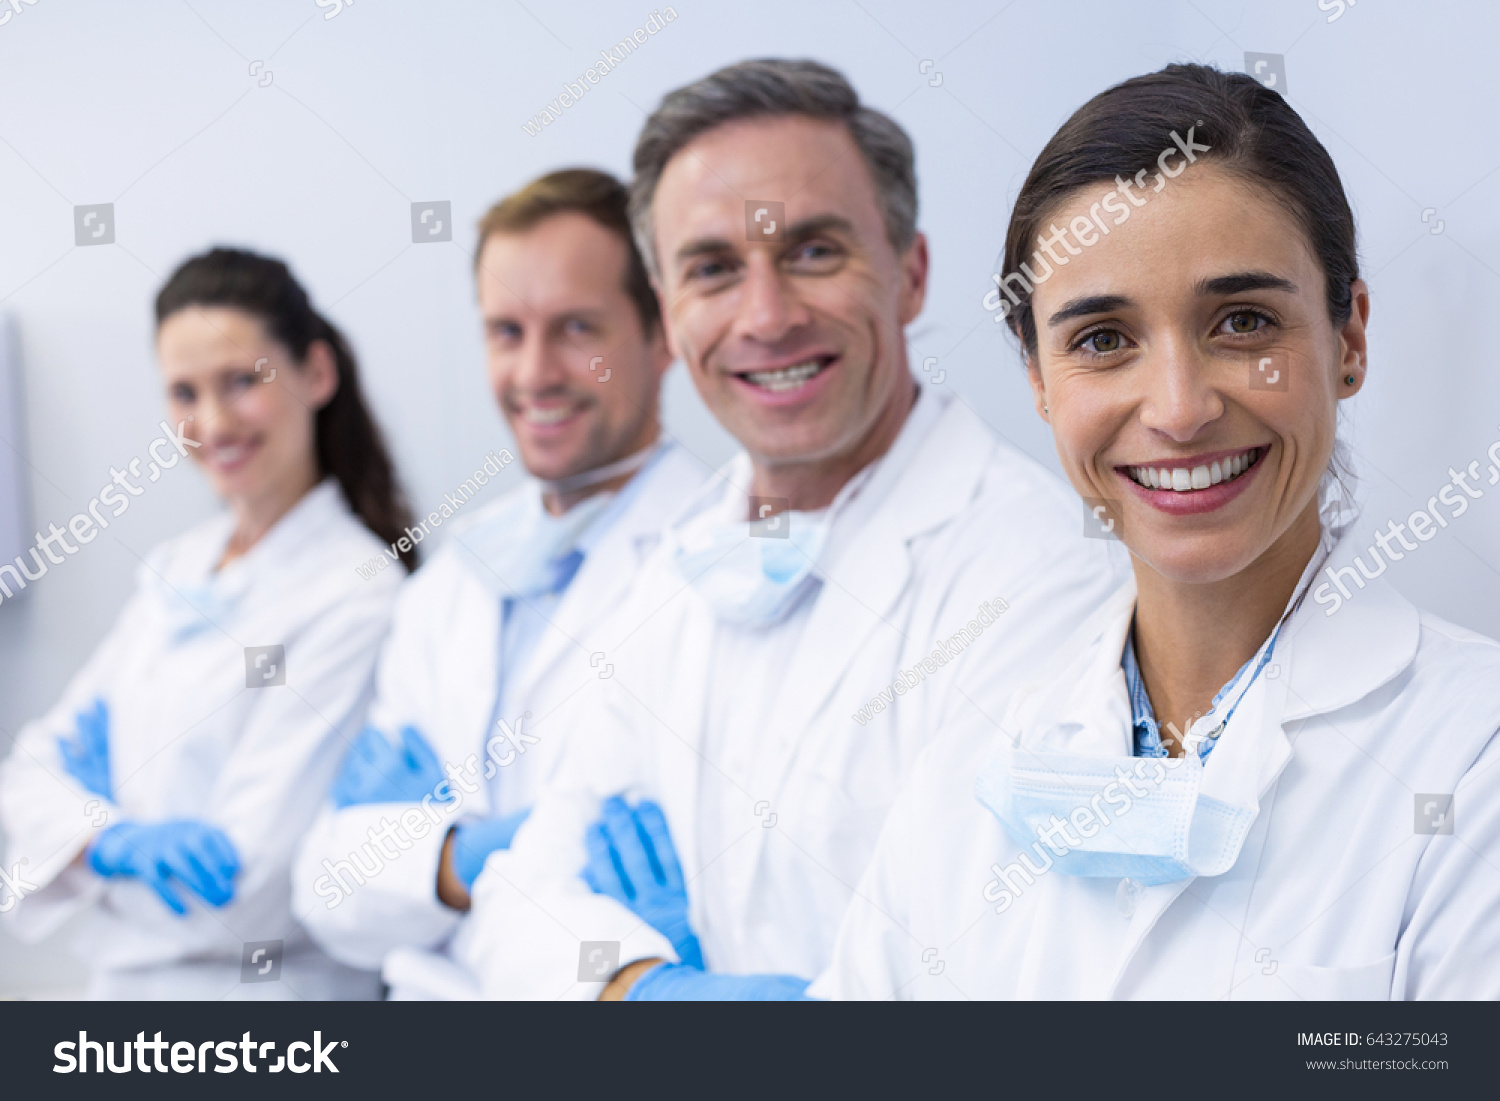 Portrait of smiling dentists standing with arms crossed in dental clinic #643275043